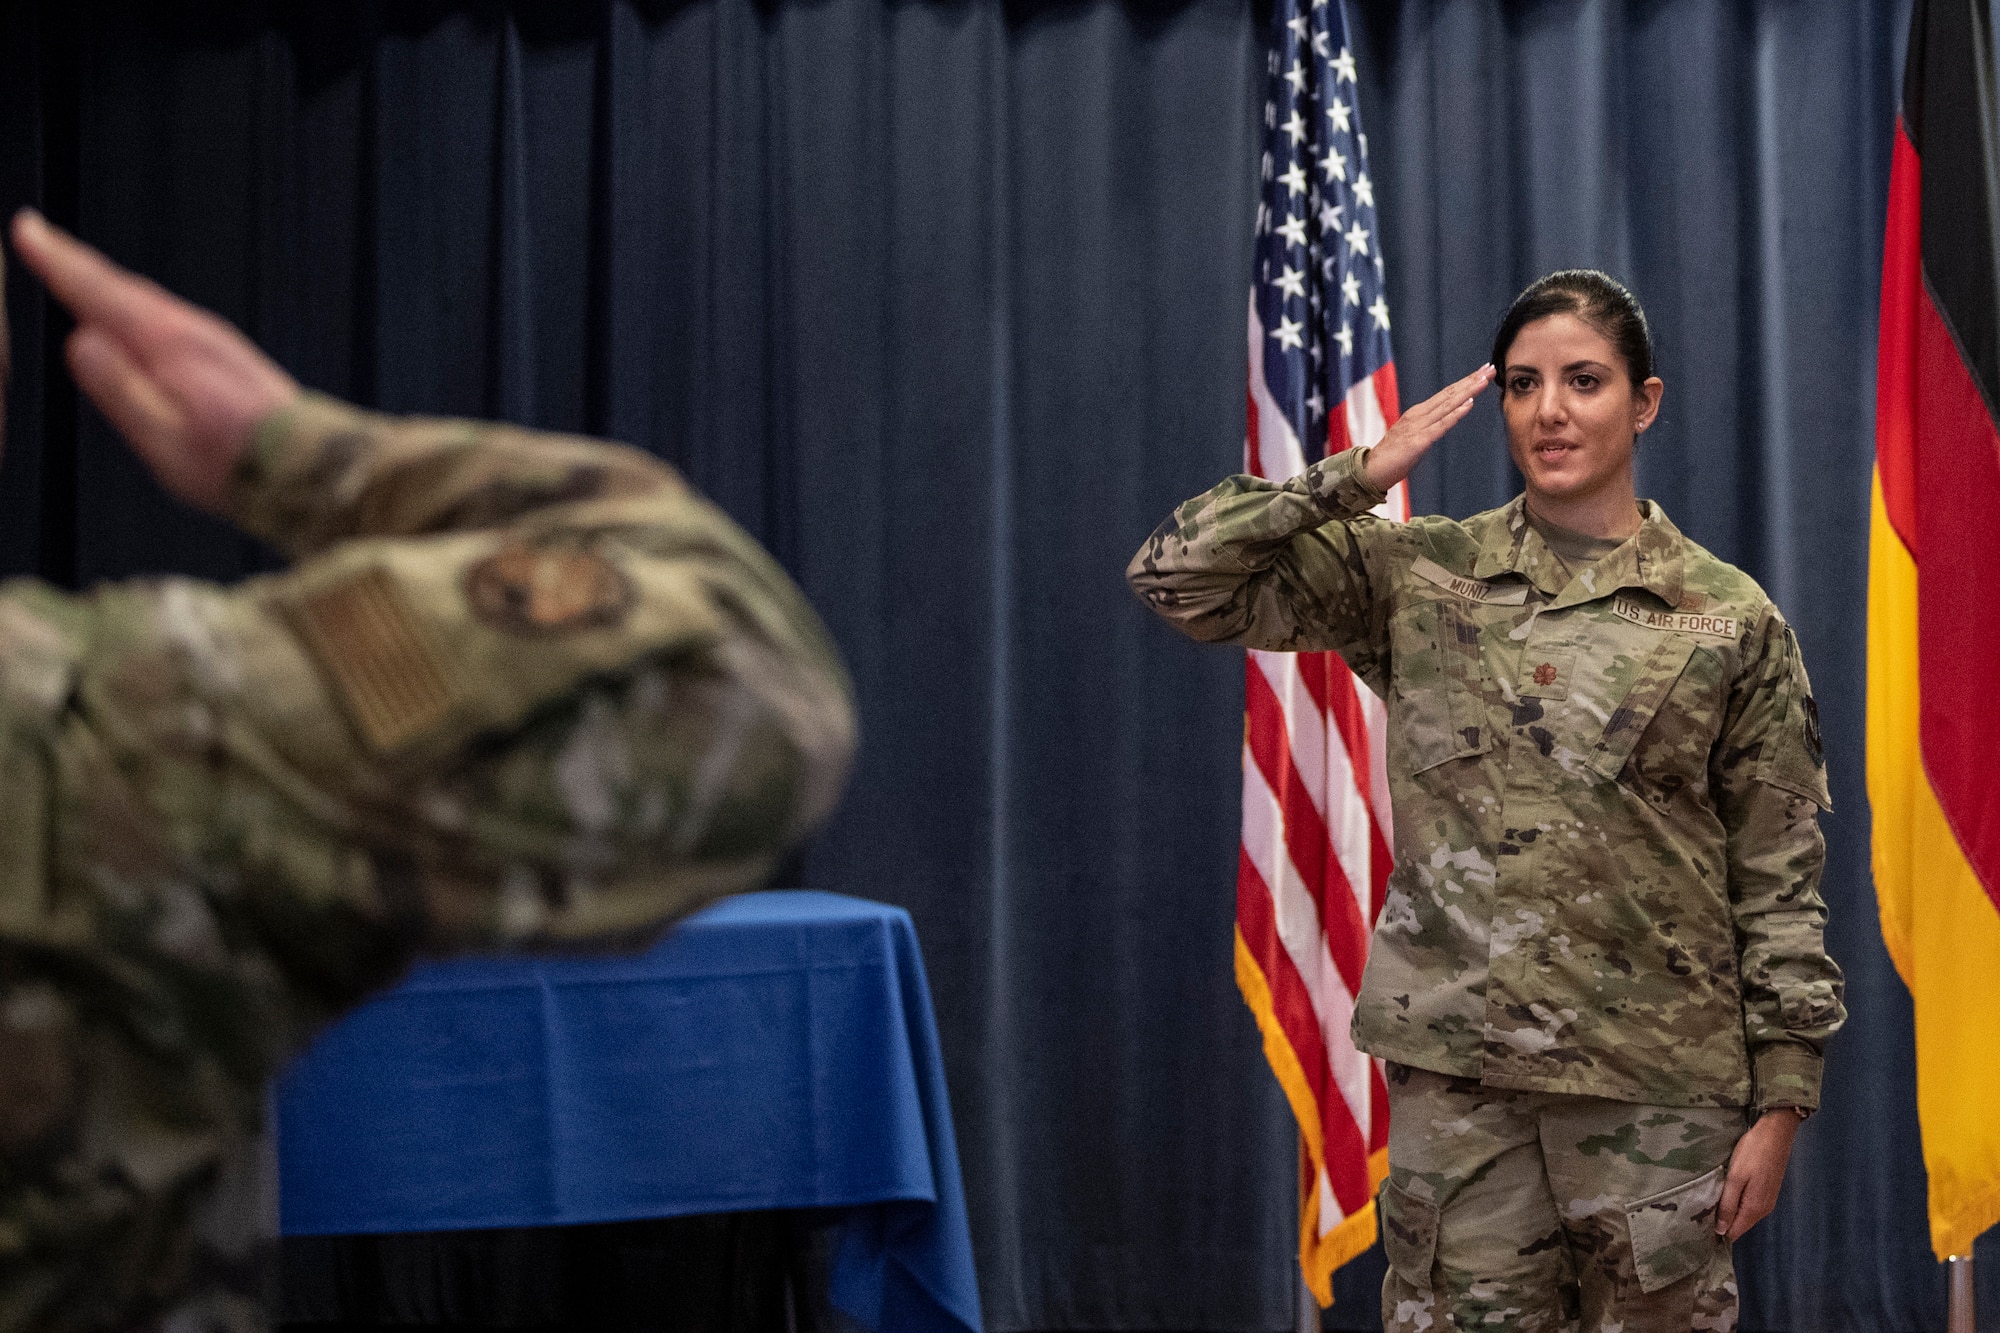 U.S. Air Force Maj. Ingrid Muniz, 52nd Force Support Squadron commander, renders her first salute to the 52nd FSS at the squadron’s change of command ceremony July 6, 2021, on Spangdahlem Air Base, Germany. Muniz assumed command of the 52nd FSS from U.S. Air Force Lt. Col. Baker. (U.S. Air Force photo by Senior Airman Ali Stewart)